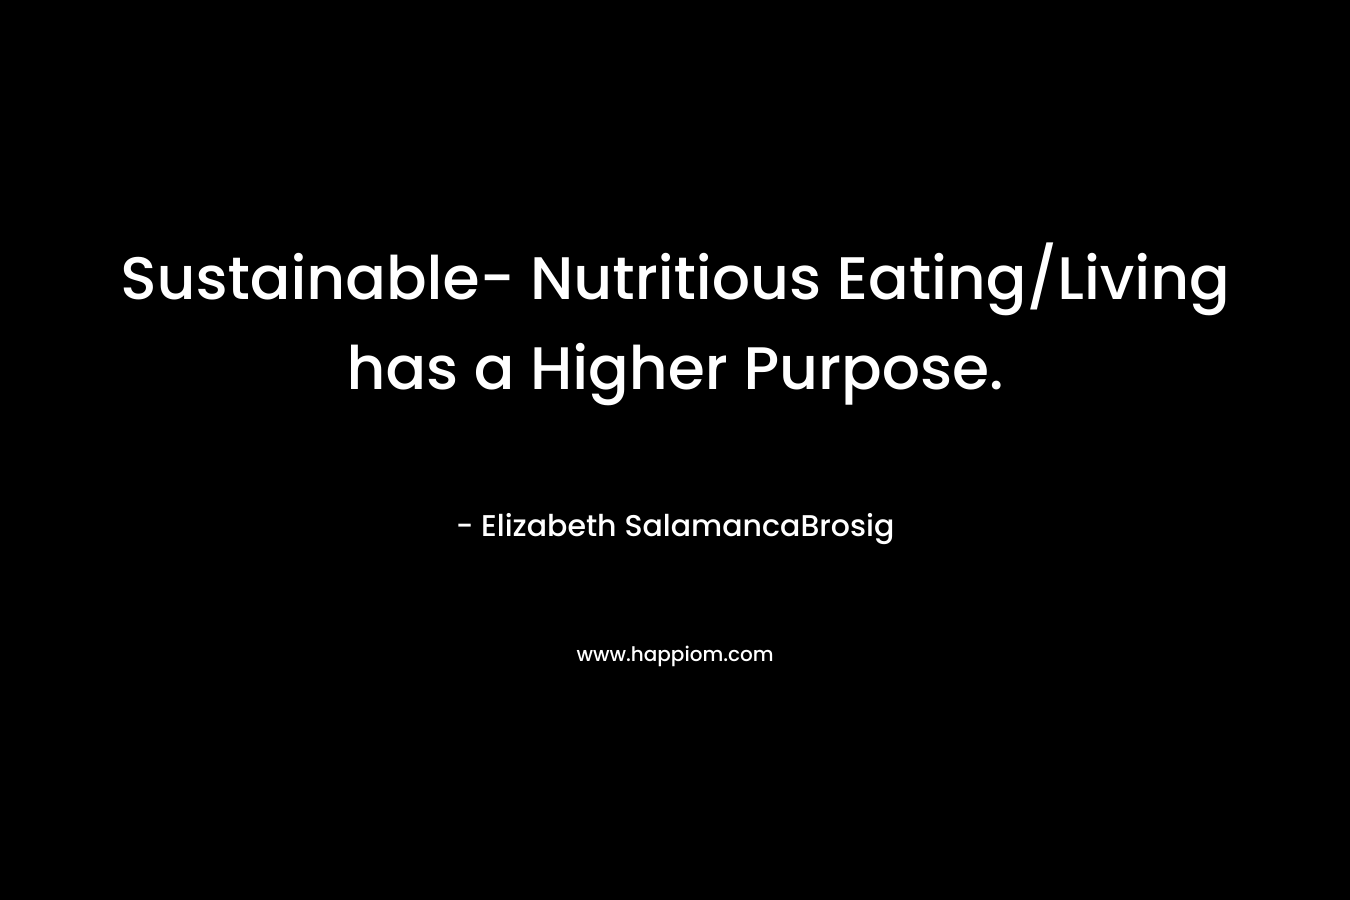 Sustainable- Nutritious Eating/Living has a Higher Purpose. – Elizabeth SalamancaBrosig